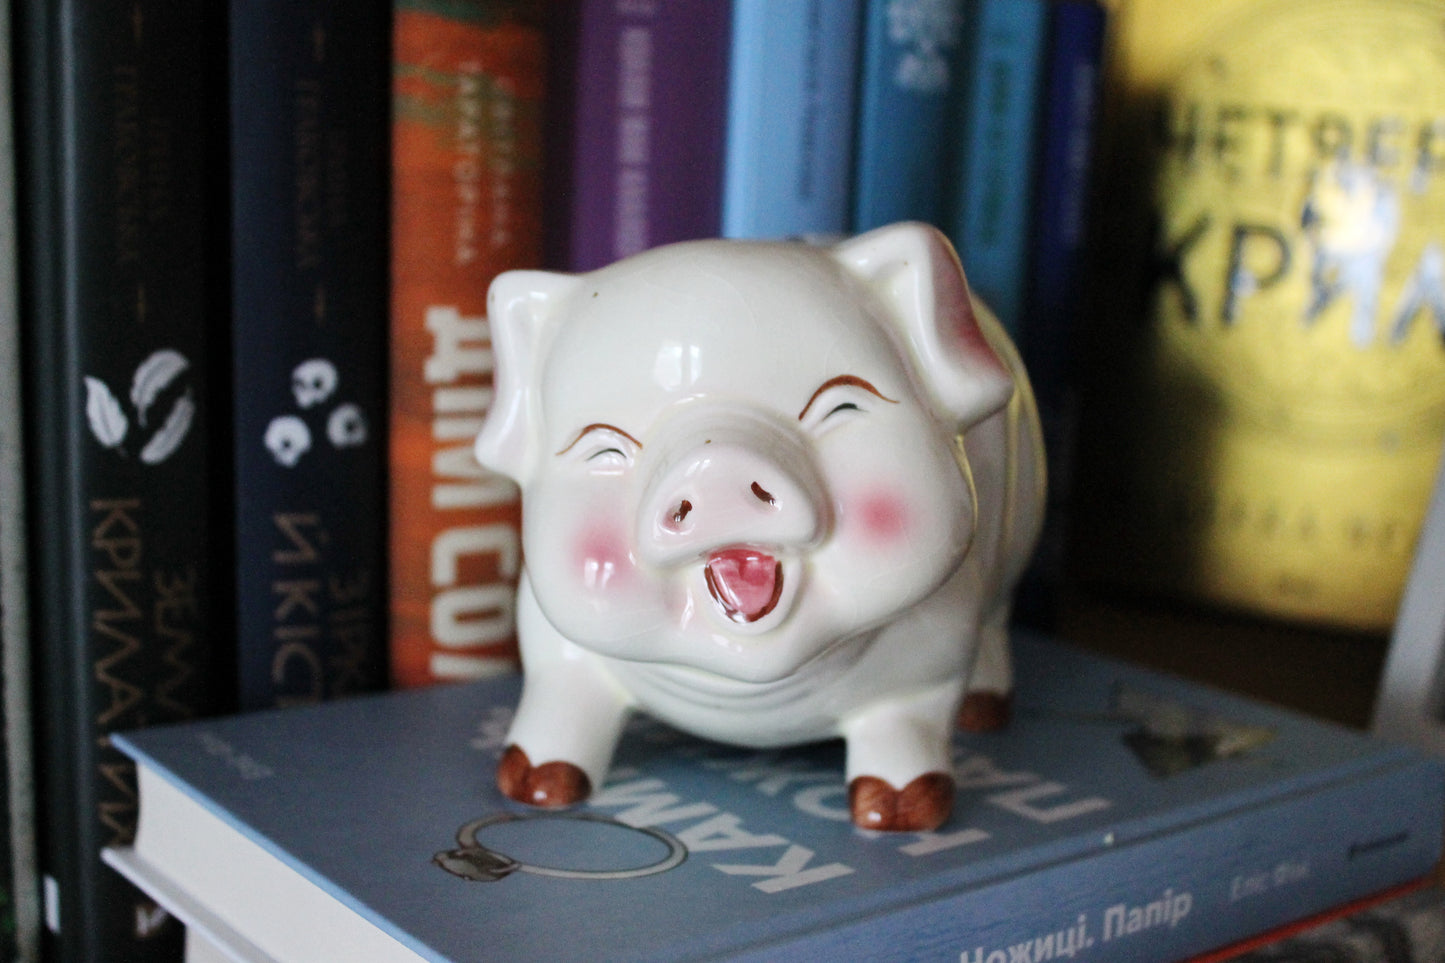 Porcelain pink Piggy Bank 5.9 inches - Vintage Piggy Bank - Home decor - Made in Germany - 1990-2000s